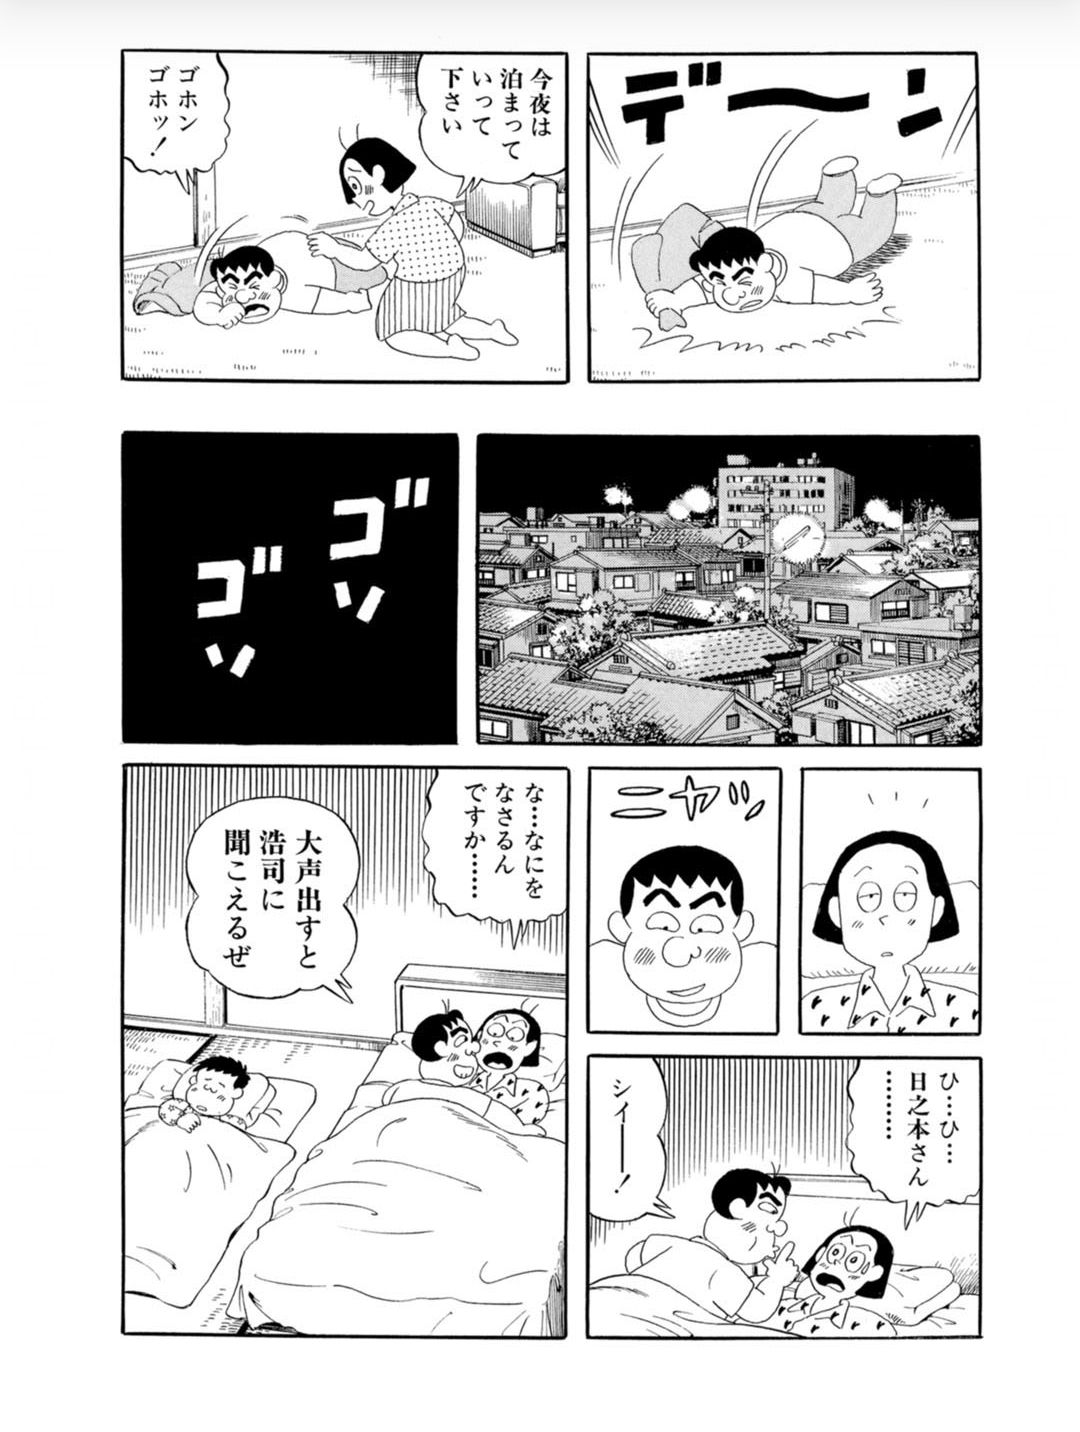 【Sad news】The main character's manga wwwwwwwwwwww about a doyaming student who rapes his son's homeroom teacher 3